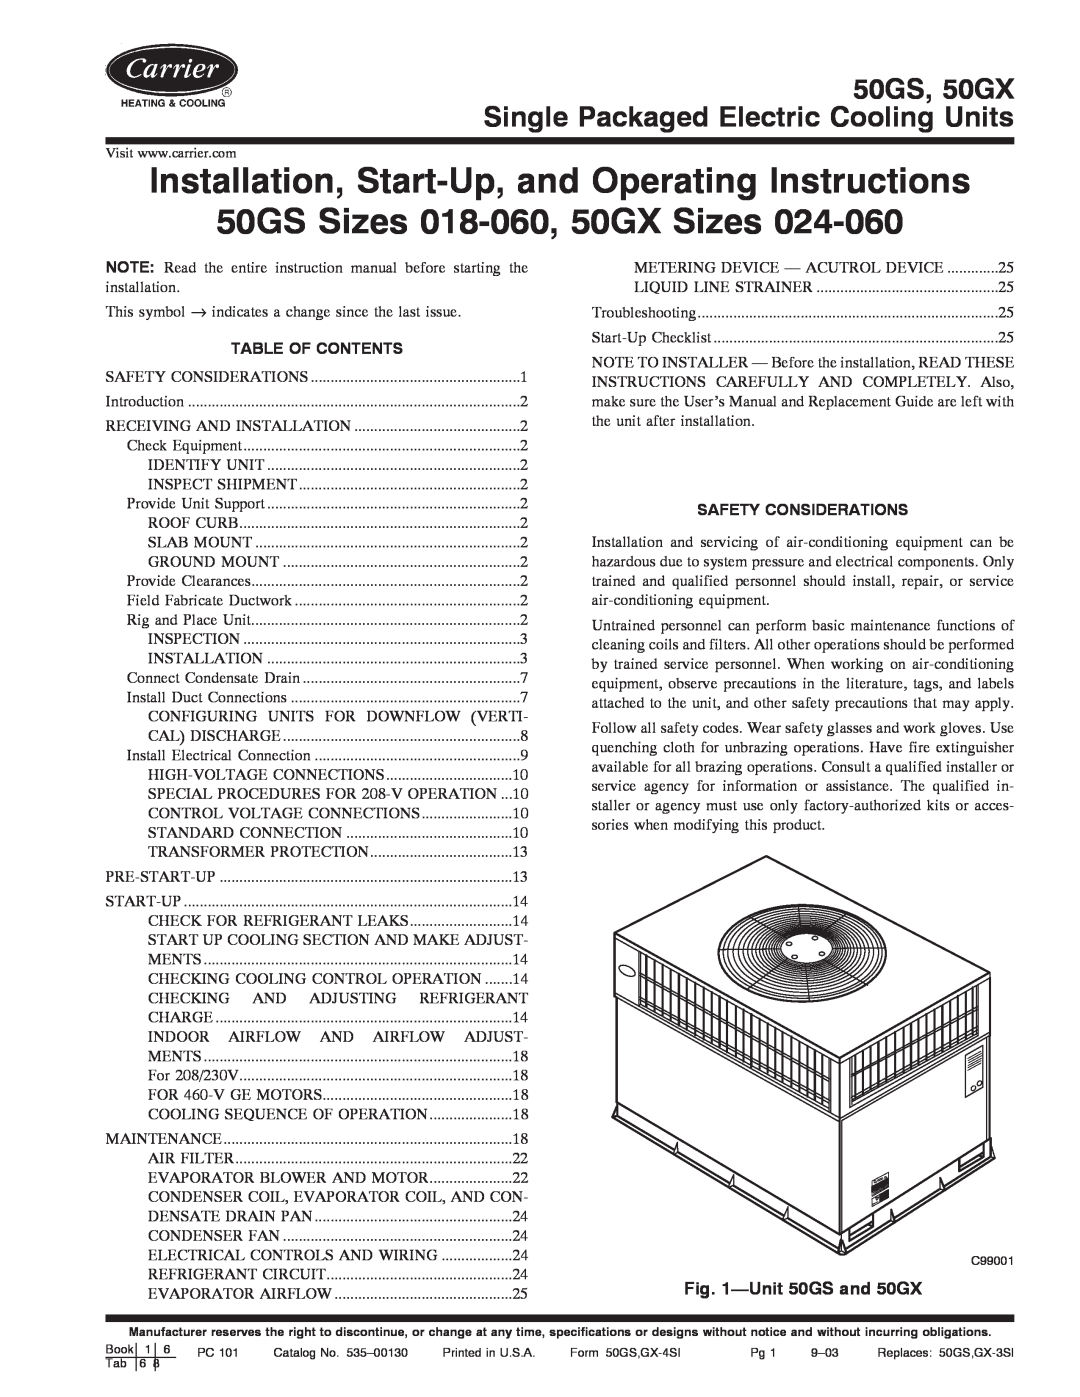 Carrier instruction manual Unit50GS and 50GX, Table Of Contents, Safety Considerations, 50GS Sizes 018-060,50GX Sizes 